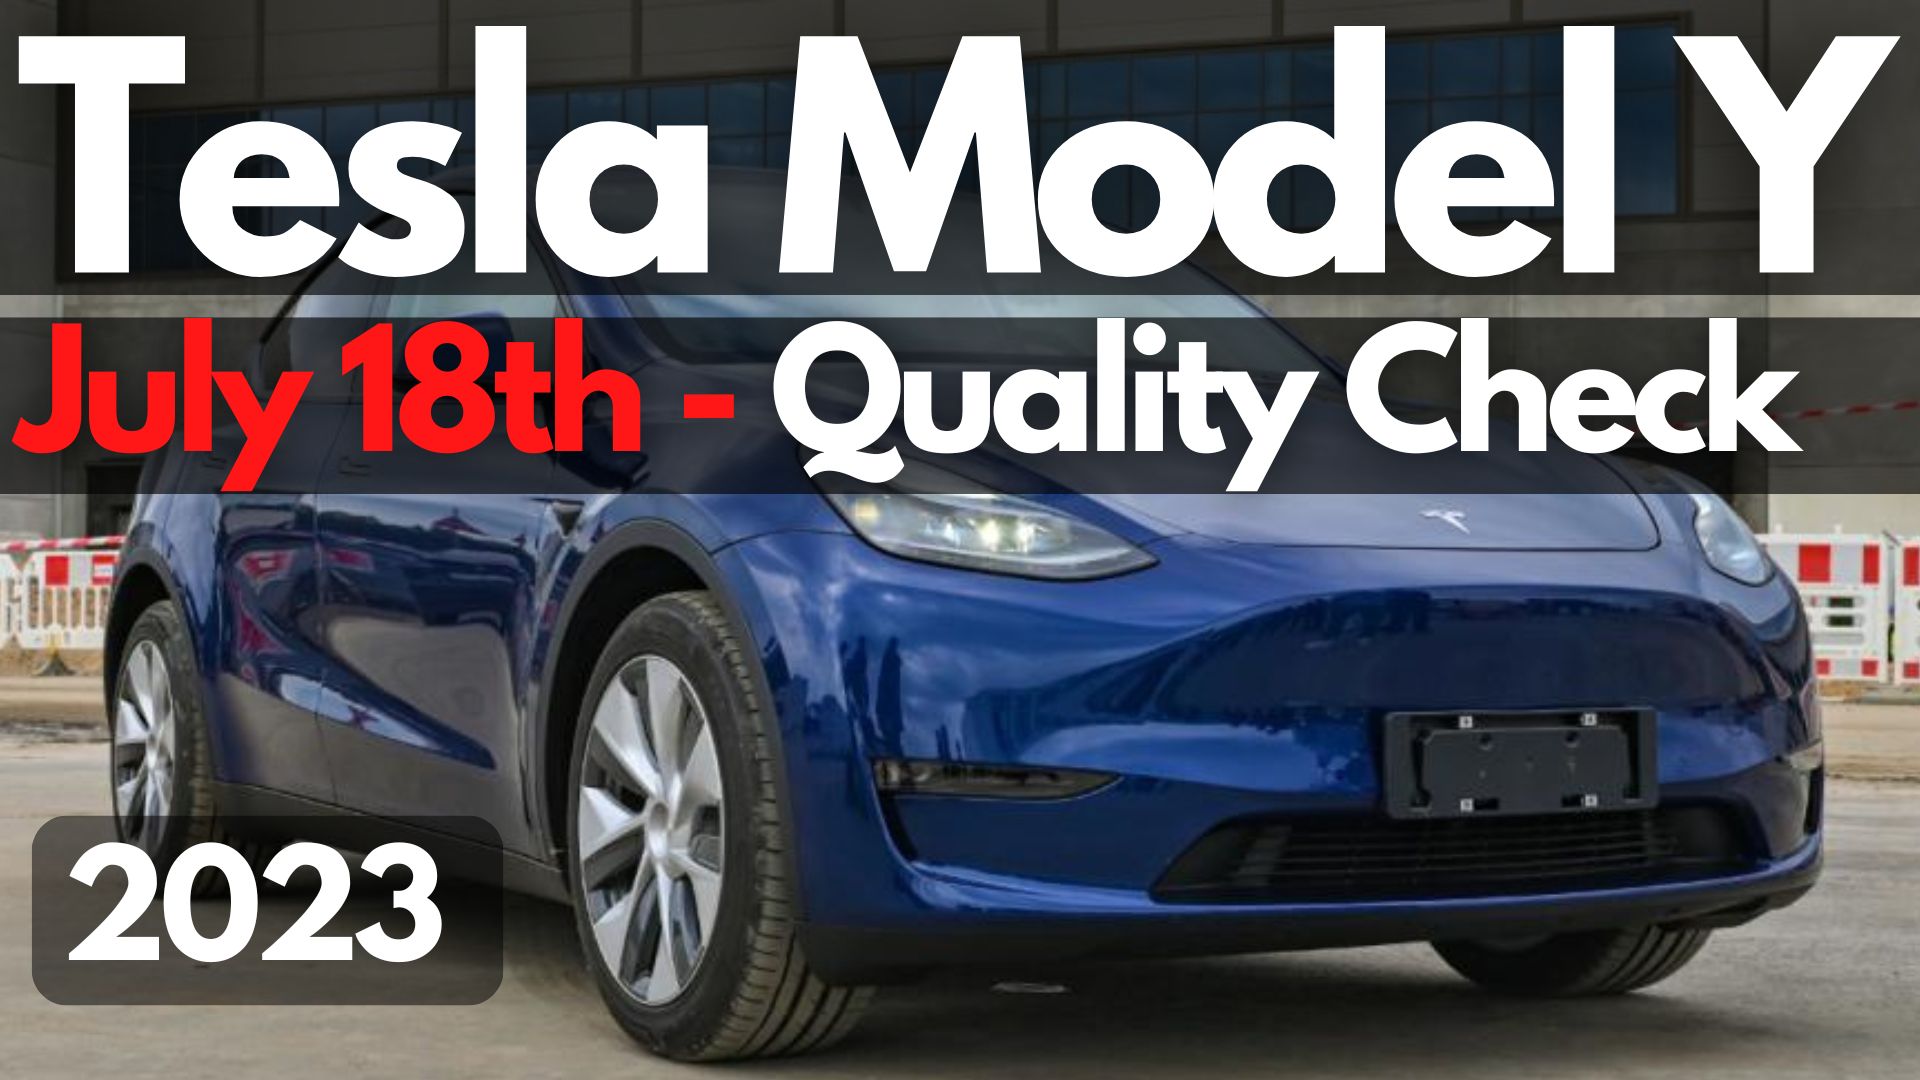 Has Tesla Improved The Model Y Build Quality For July 18, 2023?